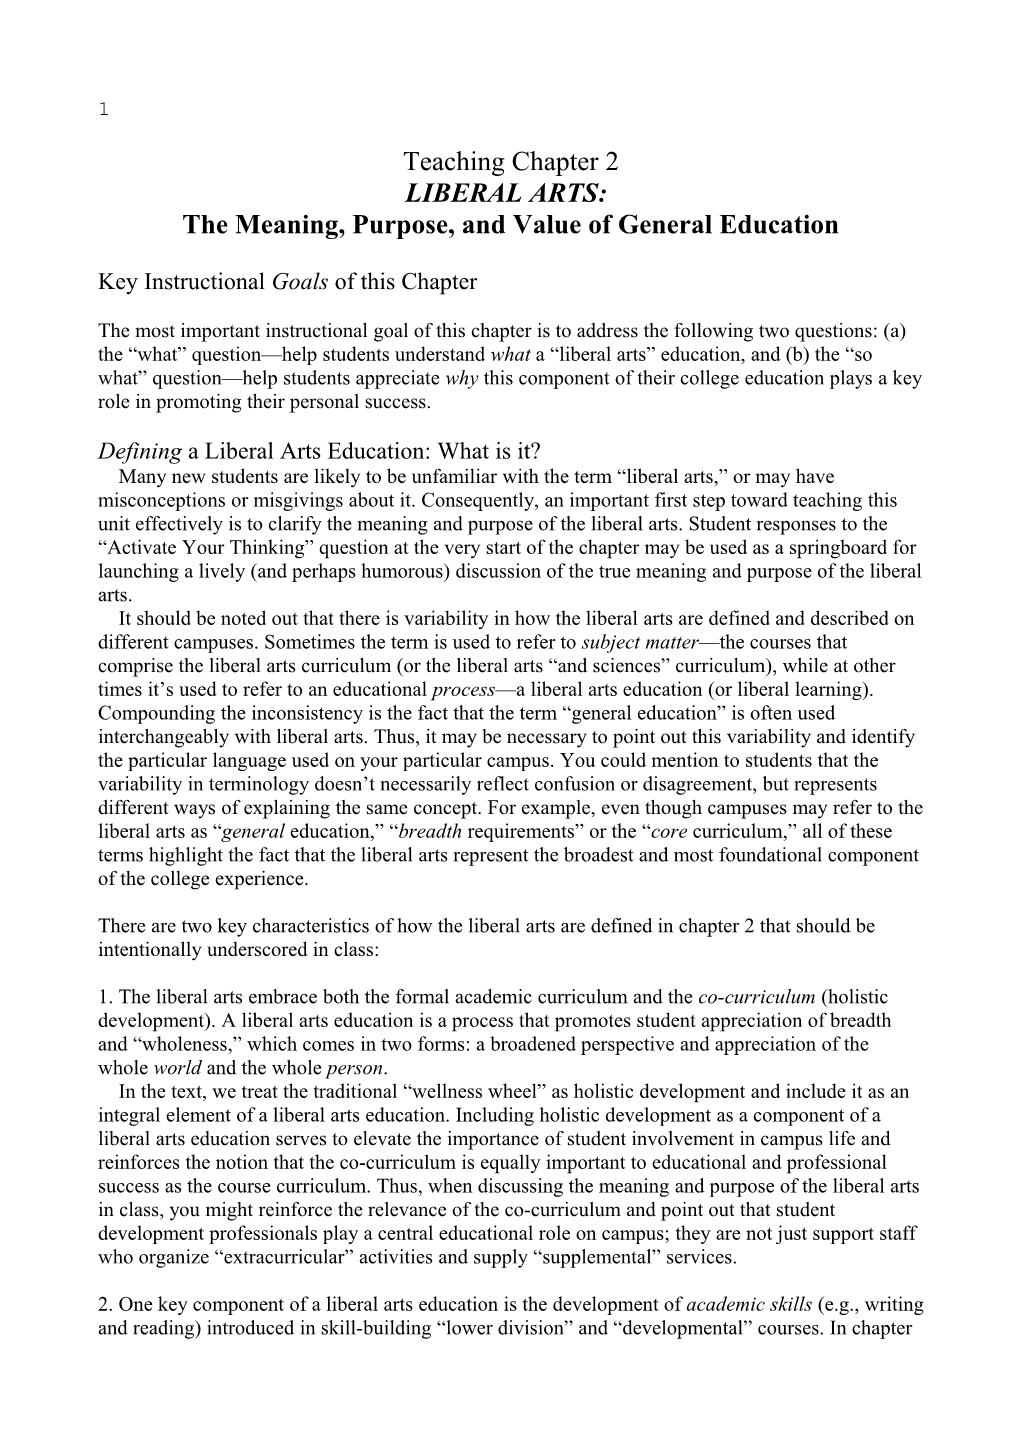 The Meaning, Purpose, and Value of General Education